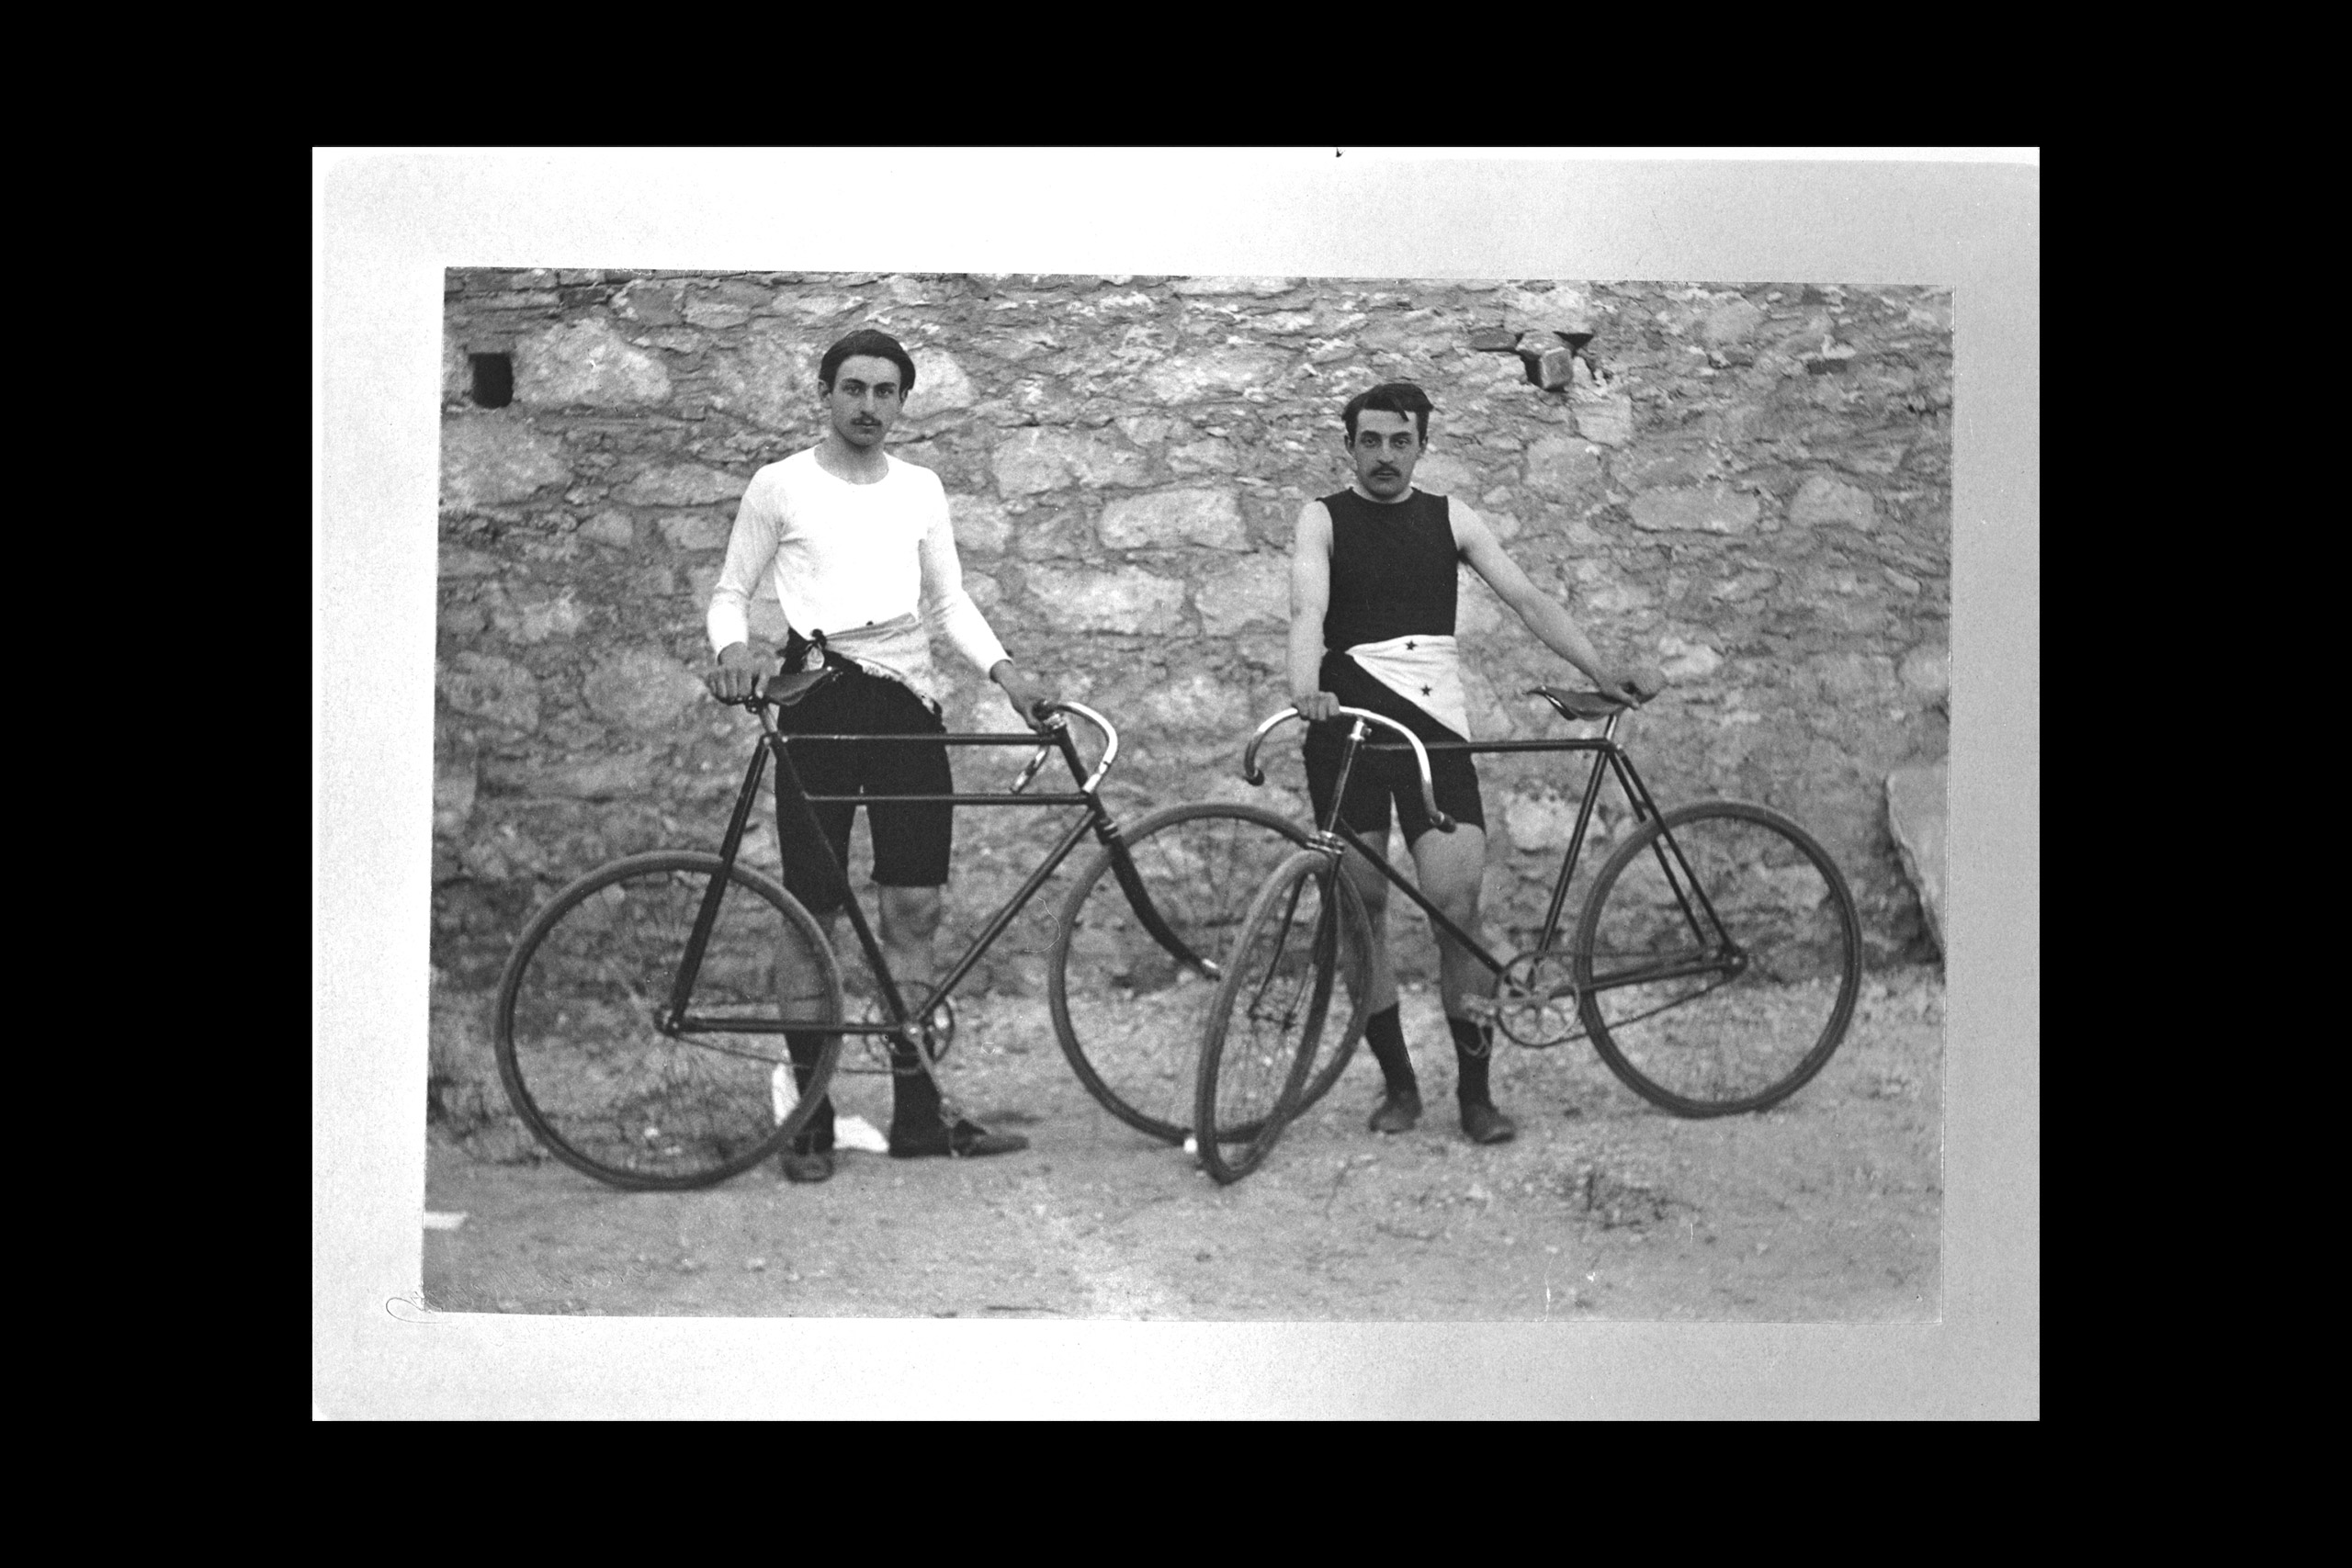 Members of the France cycling team, Léon Flameng and Paul Masson at the 1896 Olympic Games in Athens.